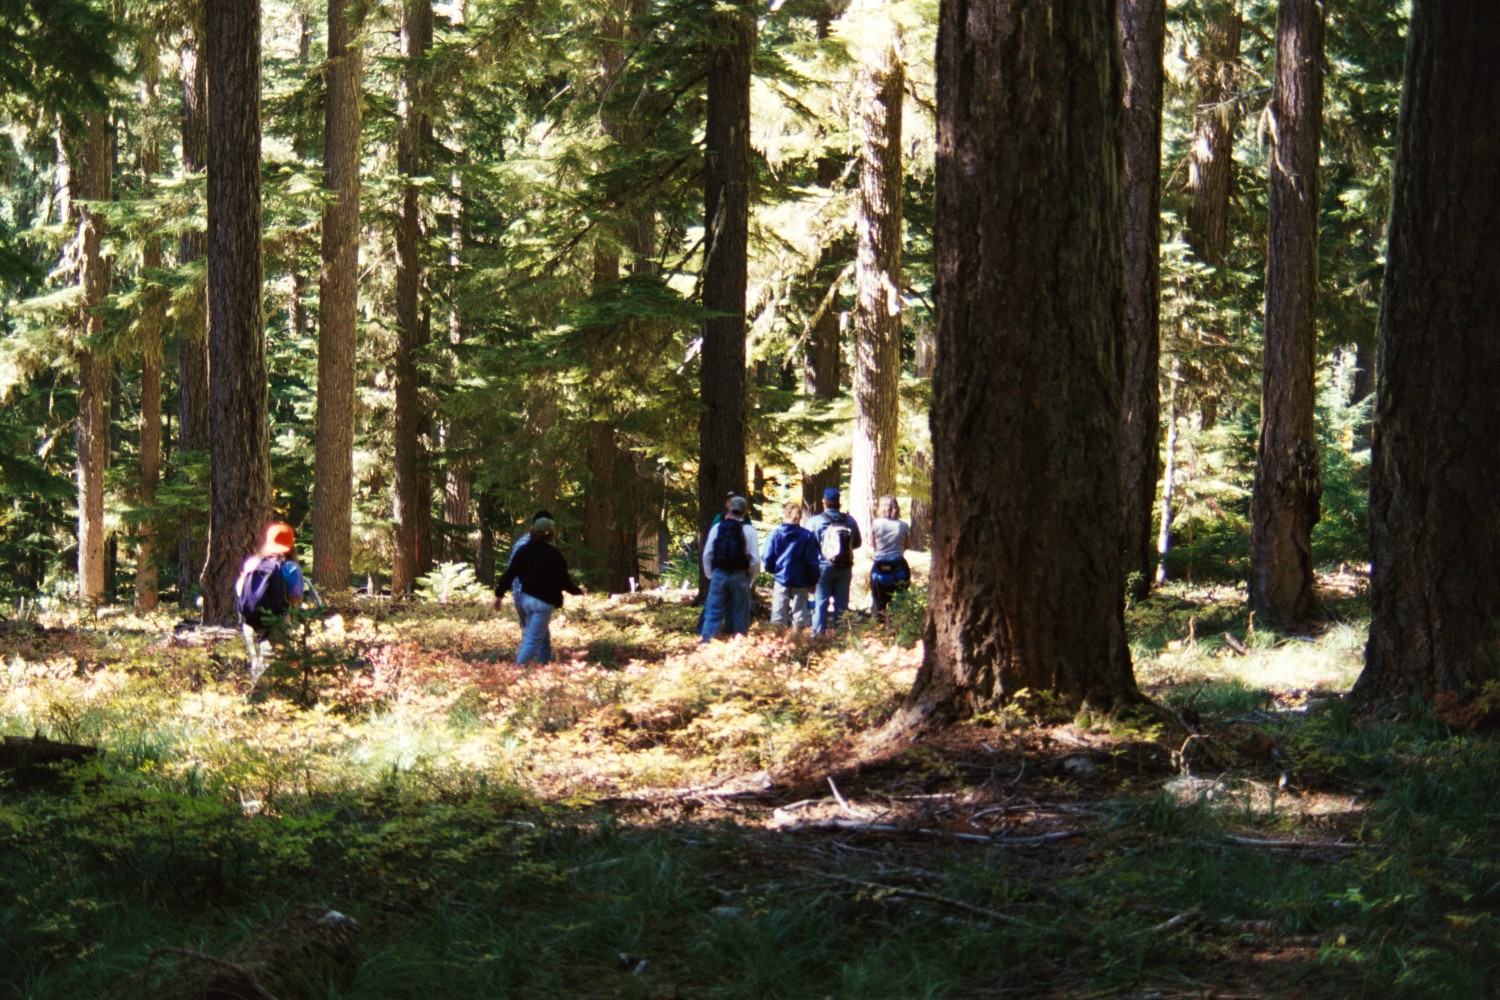 A group of volunteers are walking through the forest with some light coming through the trees and there is a large tree in the forefront of the photo.